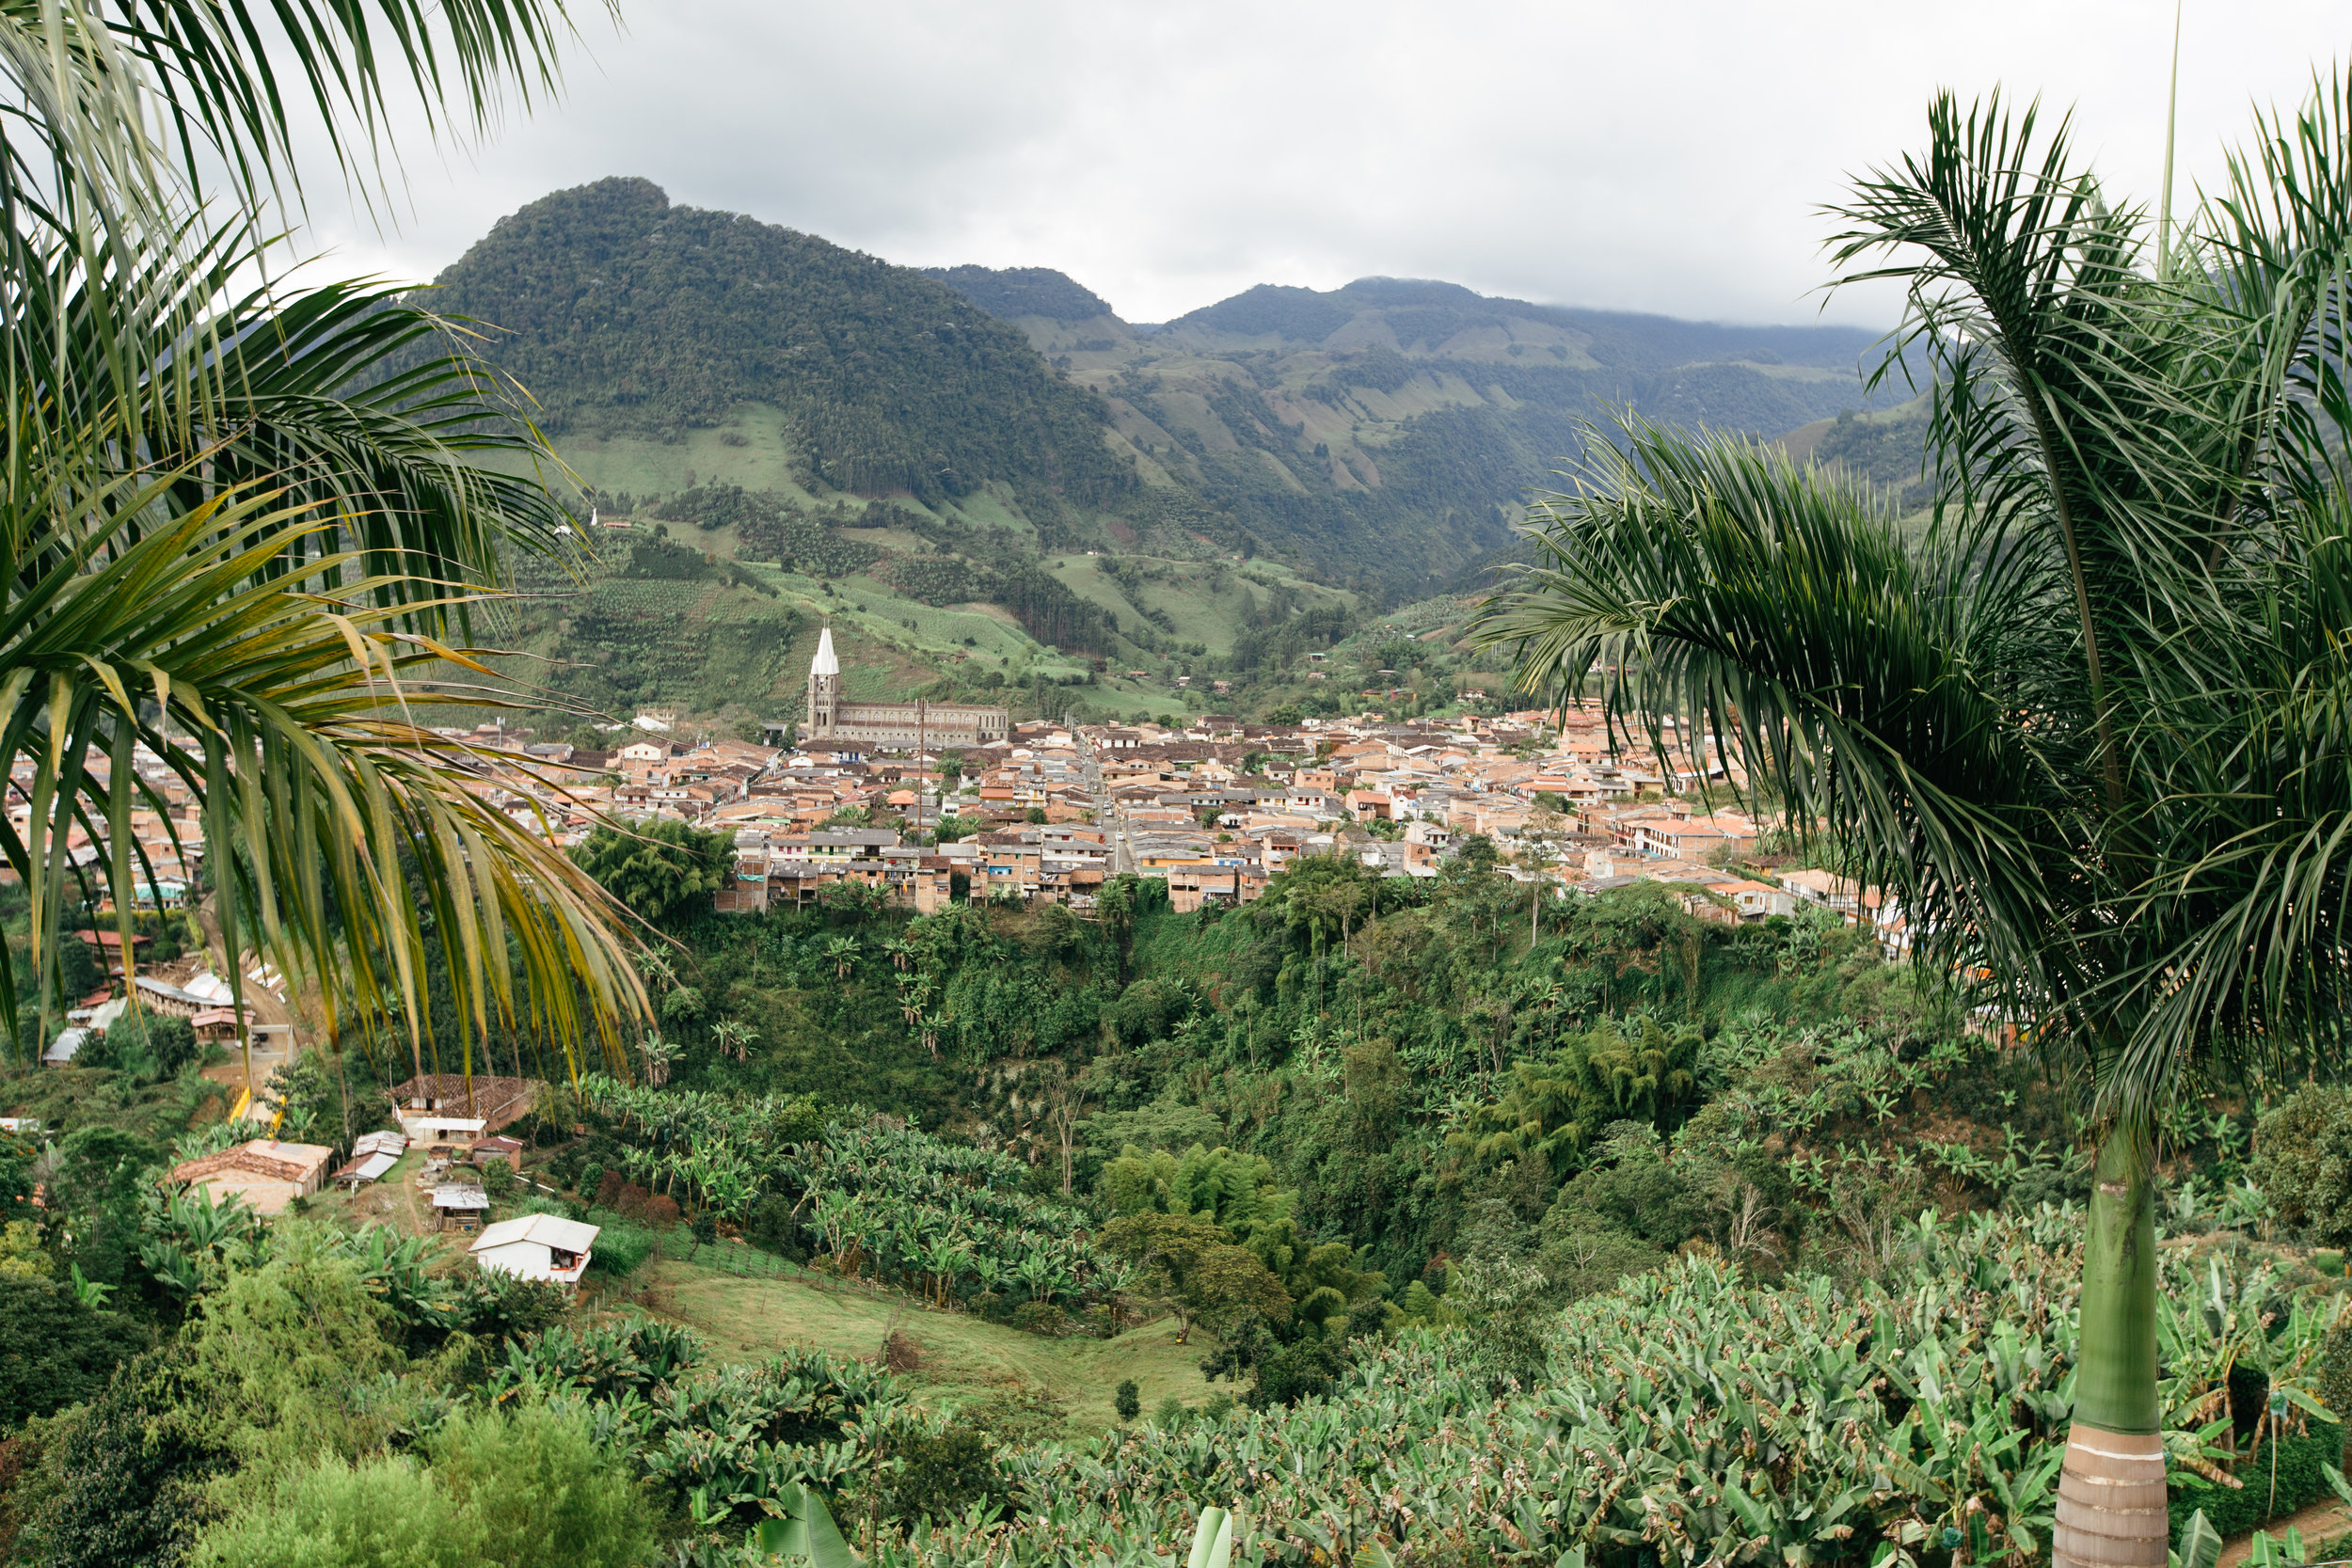  View of Jardín, a pueblo about a 3-hour drive from Medellín. 